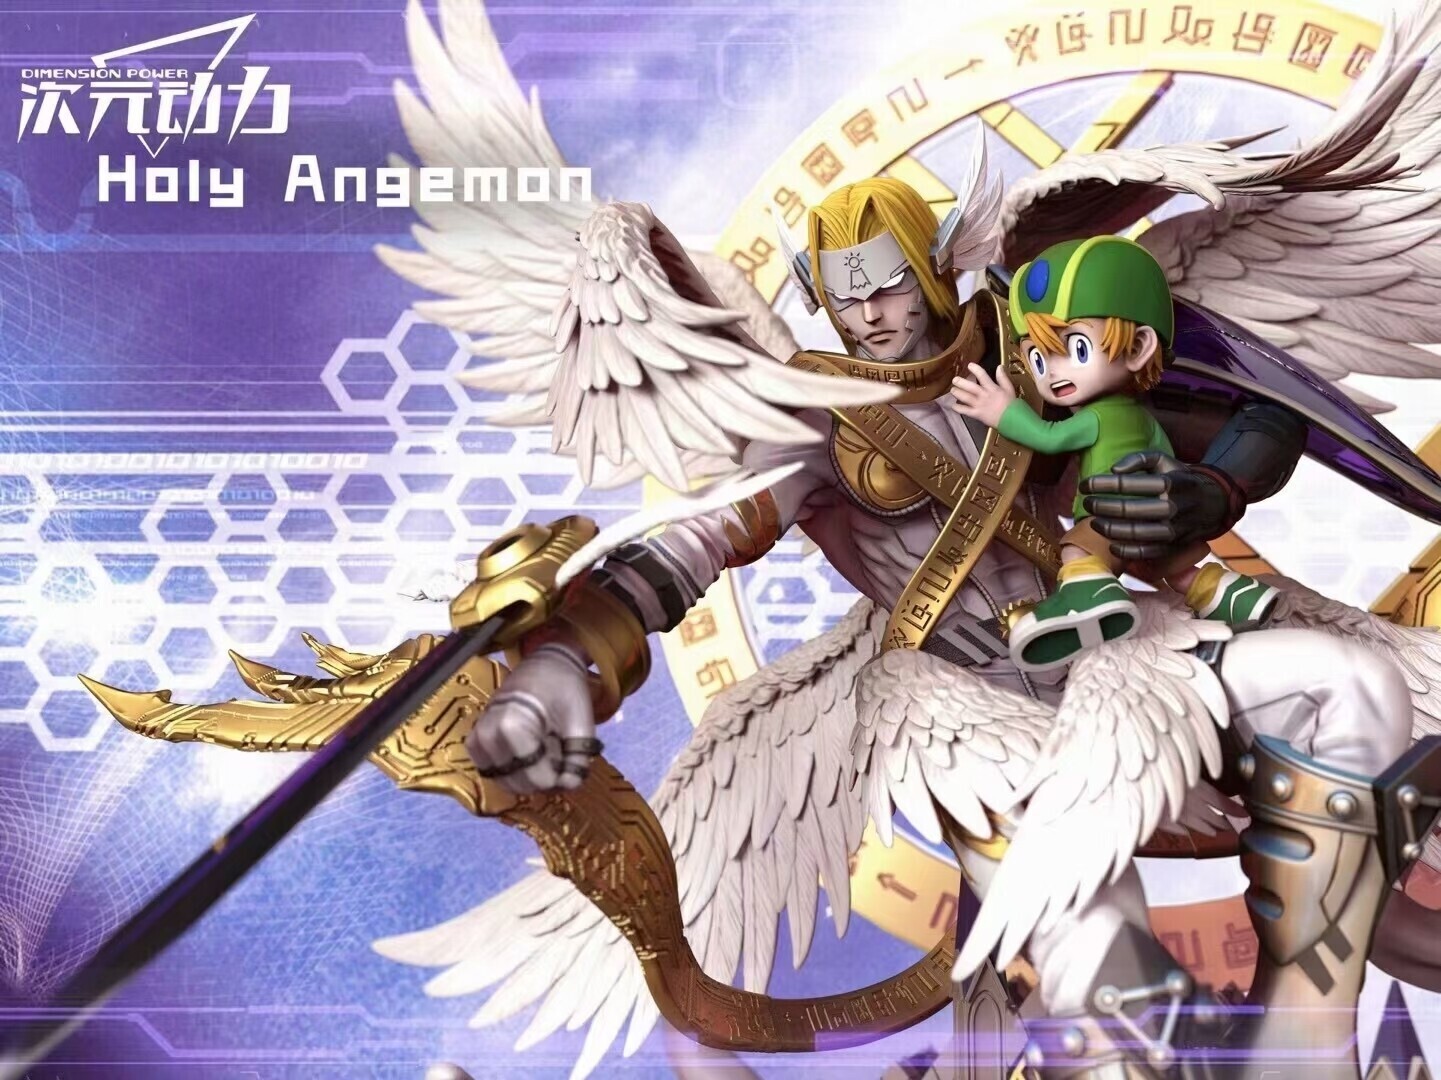 (IN STOCK) Dimension Power - Angemon